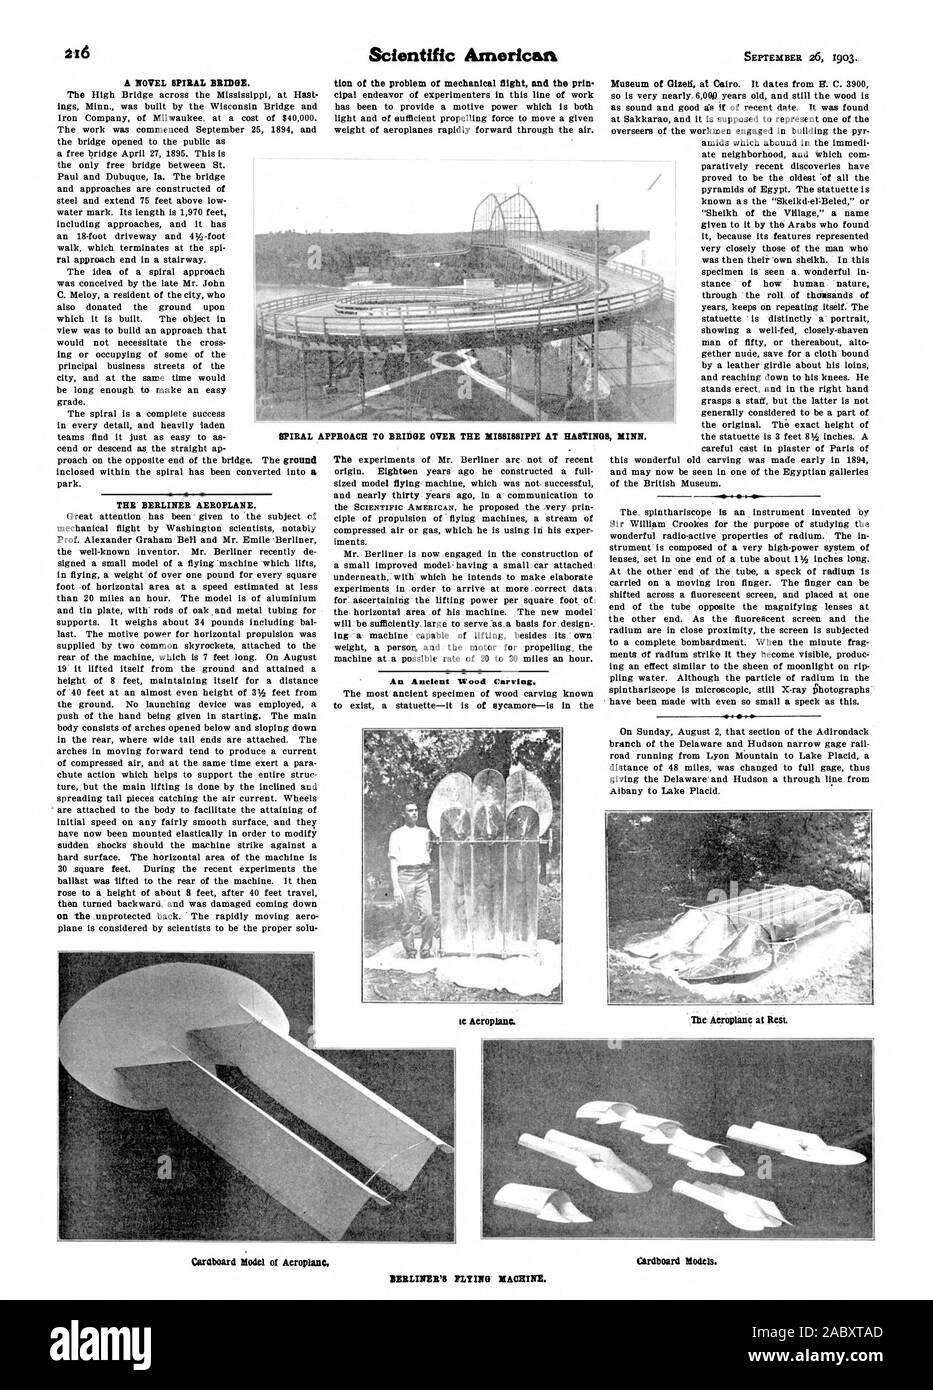 A NOVEL SPIRAL BRIDGE. THE BERLINER AEROPLANE. tion of the problem of mechanical flight and the prin  An Ancient Wood Carving. te Aeroplane. The Aeroplane at Rest. SPIRAL APPROACH TO BRIDGE OVER THE MISSISSIPPI AT HASTINGS MINN. Cardboard Model of Aeroplane. BERLINER'S PLYING MACHINE. Cardboard Models., scientific american, 1903-09-26 Stock Photo